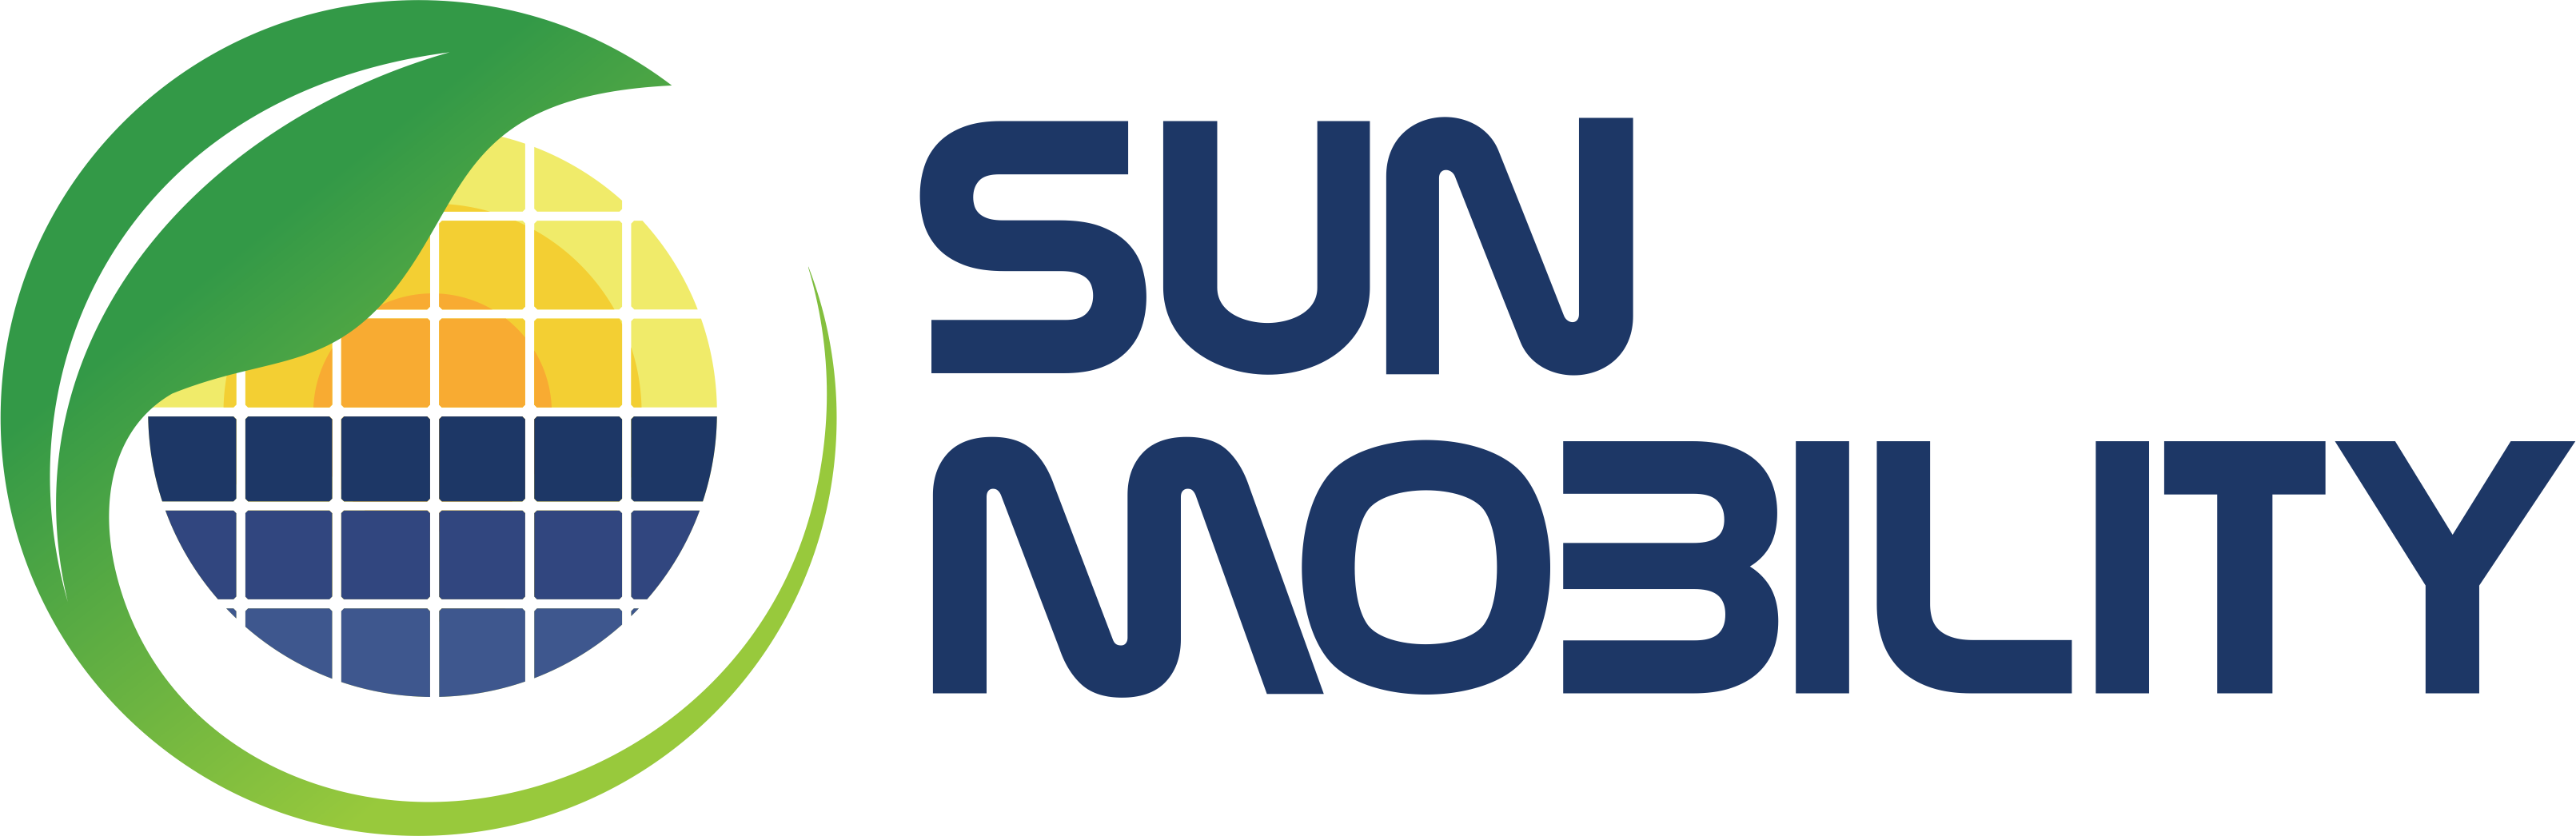 SUN Mobility introduces MaaS (Mobility-as-a-Service) solution with plans to onboard 1 million Electric Vehicles on its platform by 2025